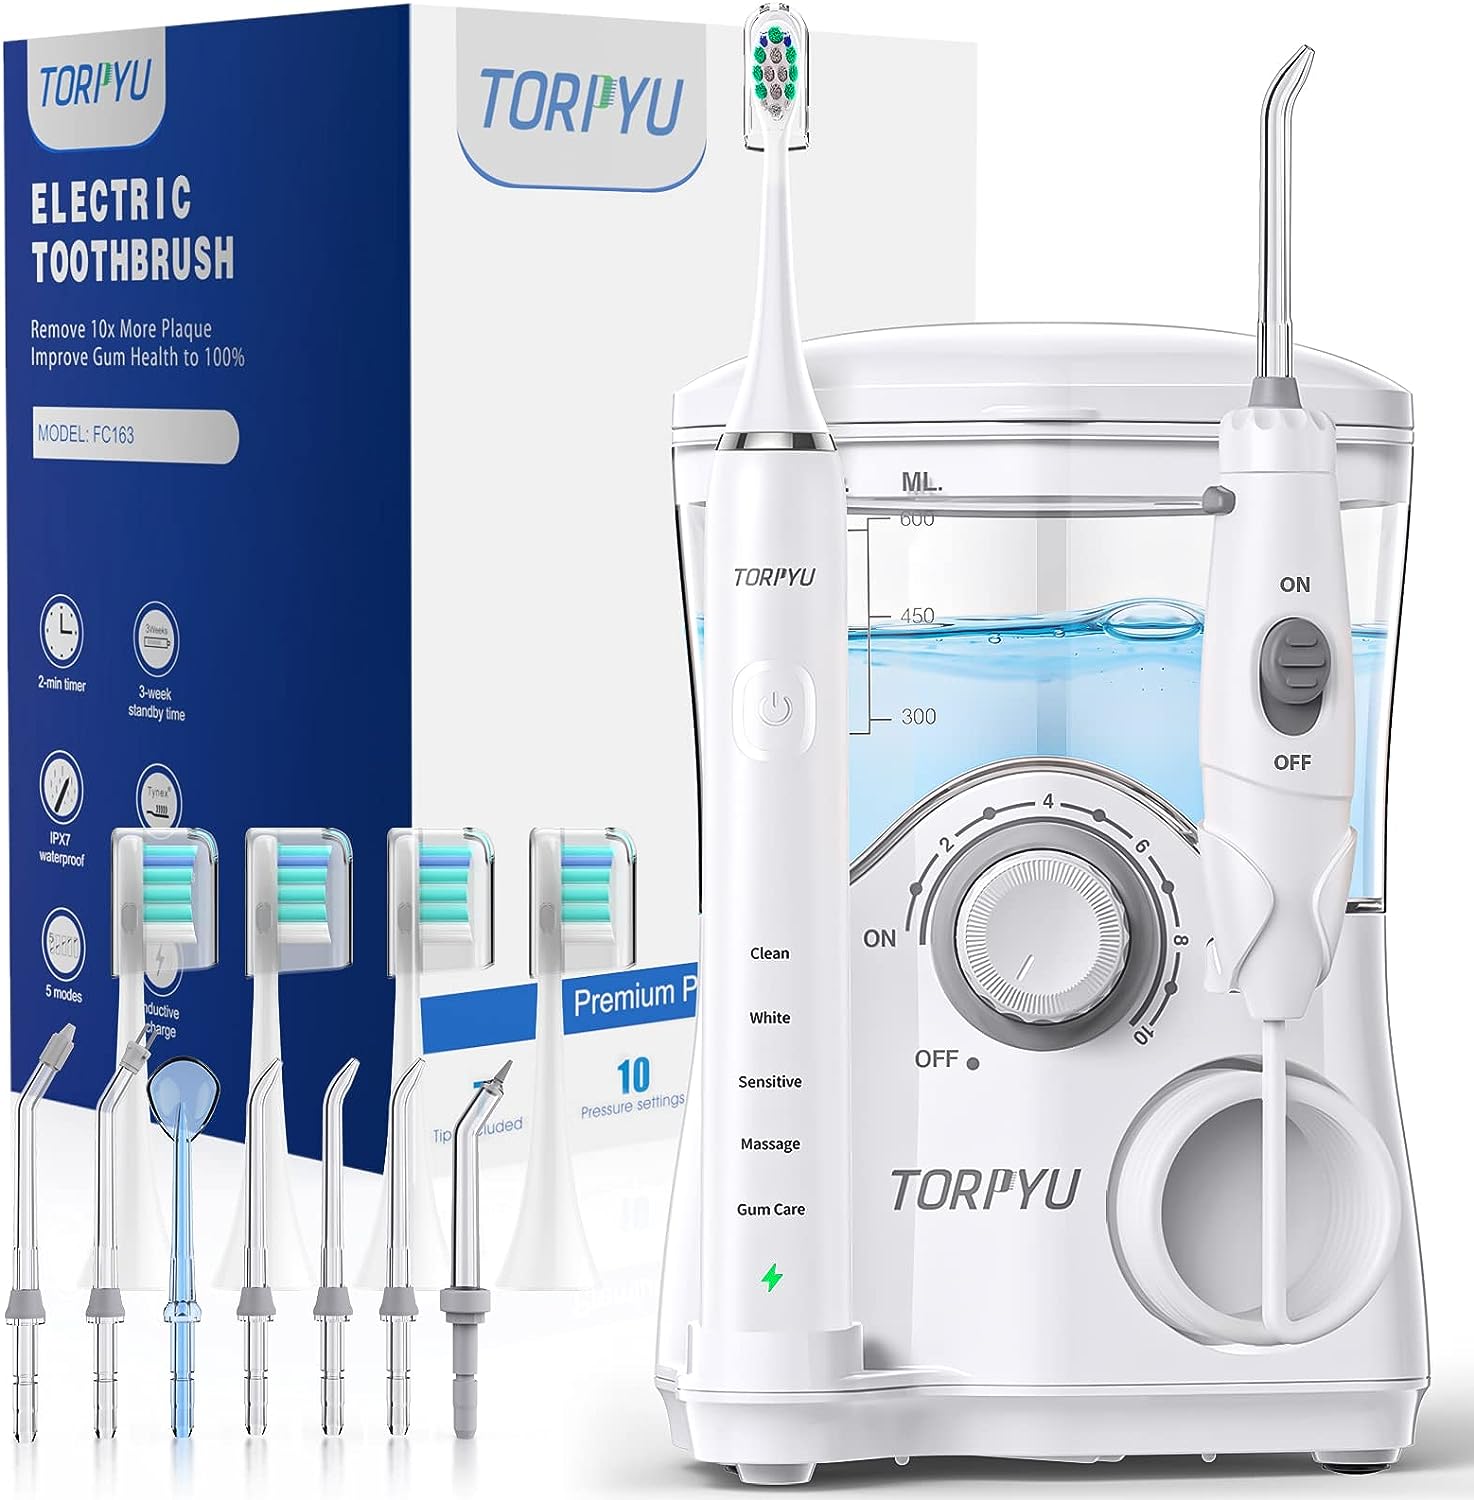 All-in-One Water Flosser & Ultrasonic Toothbrush Combo